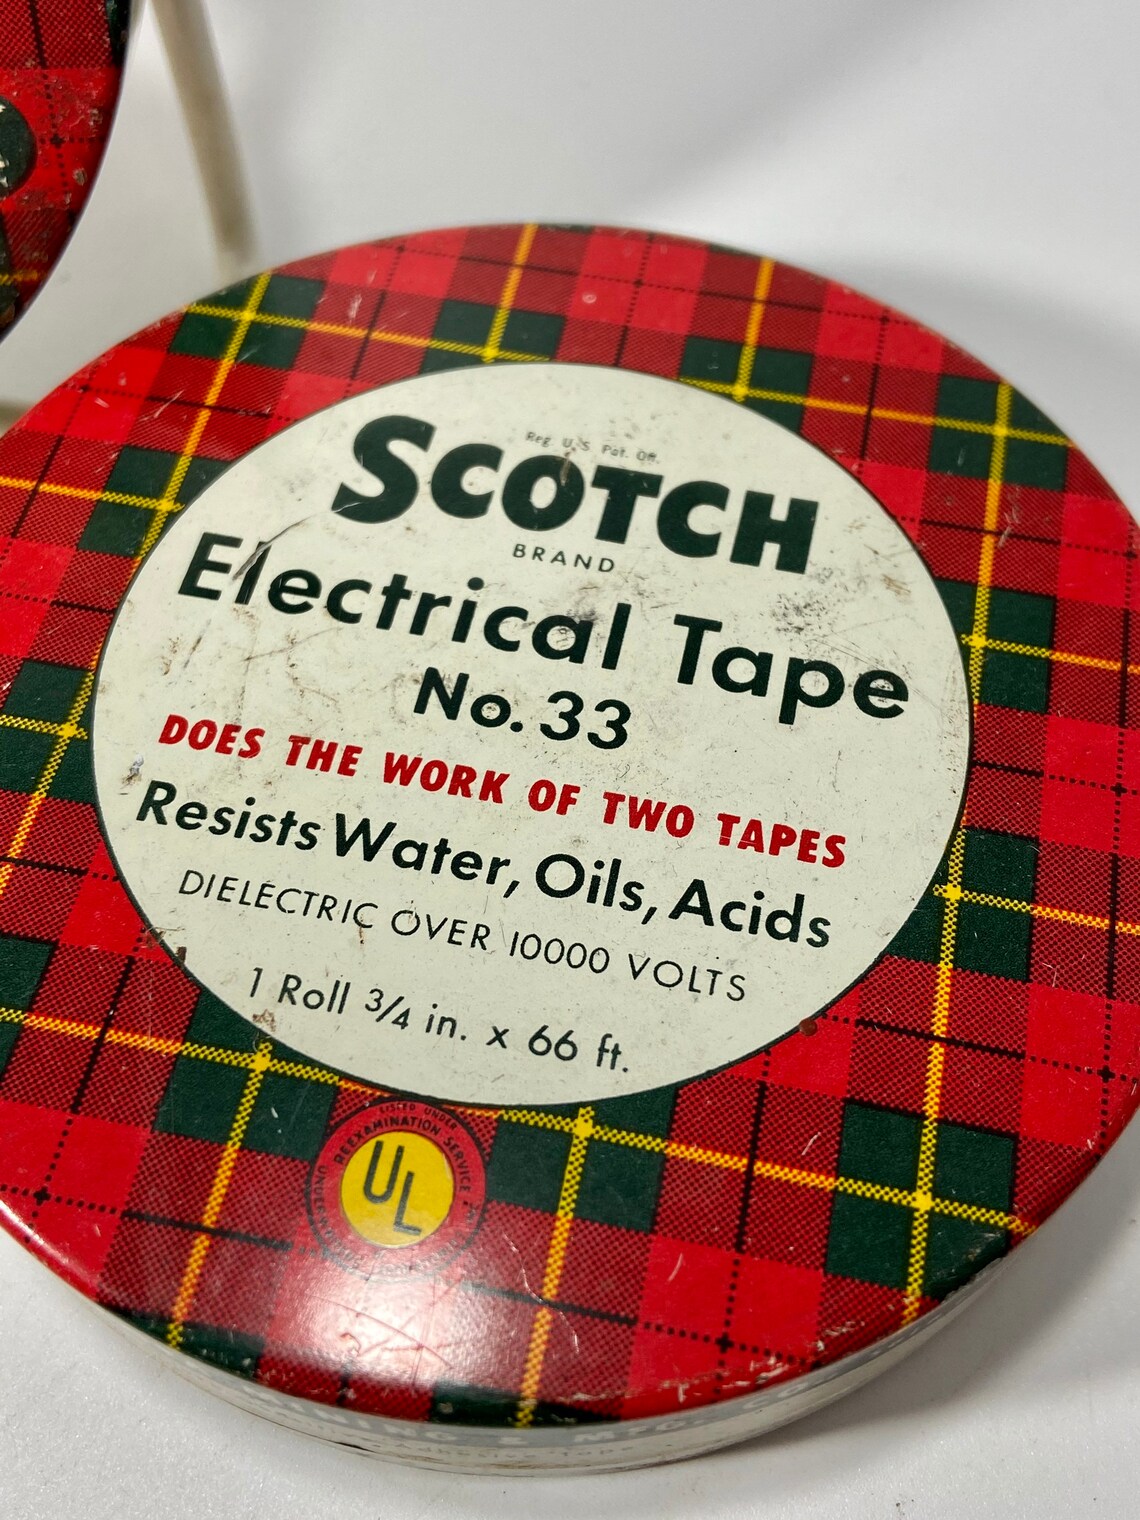 Vintage scotch brand electrical tape number 33 pair of tins | Etsy